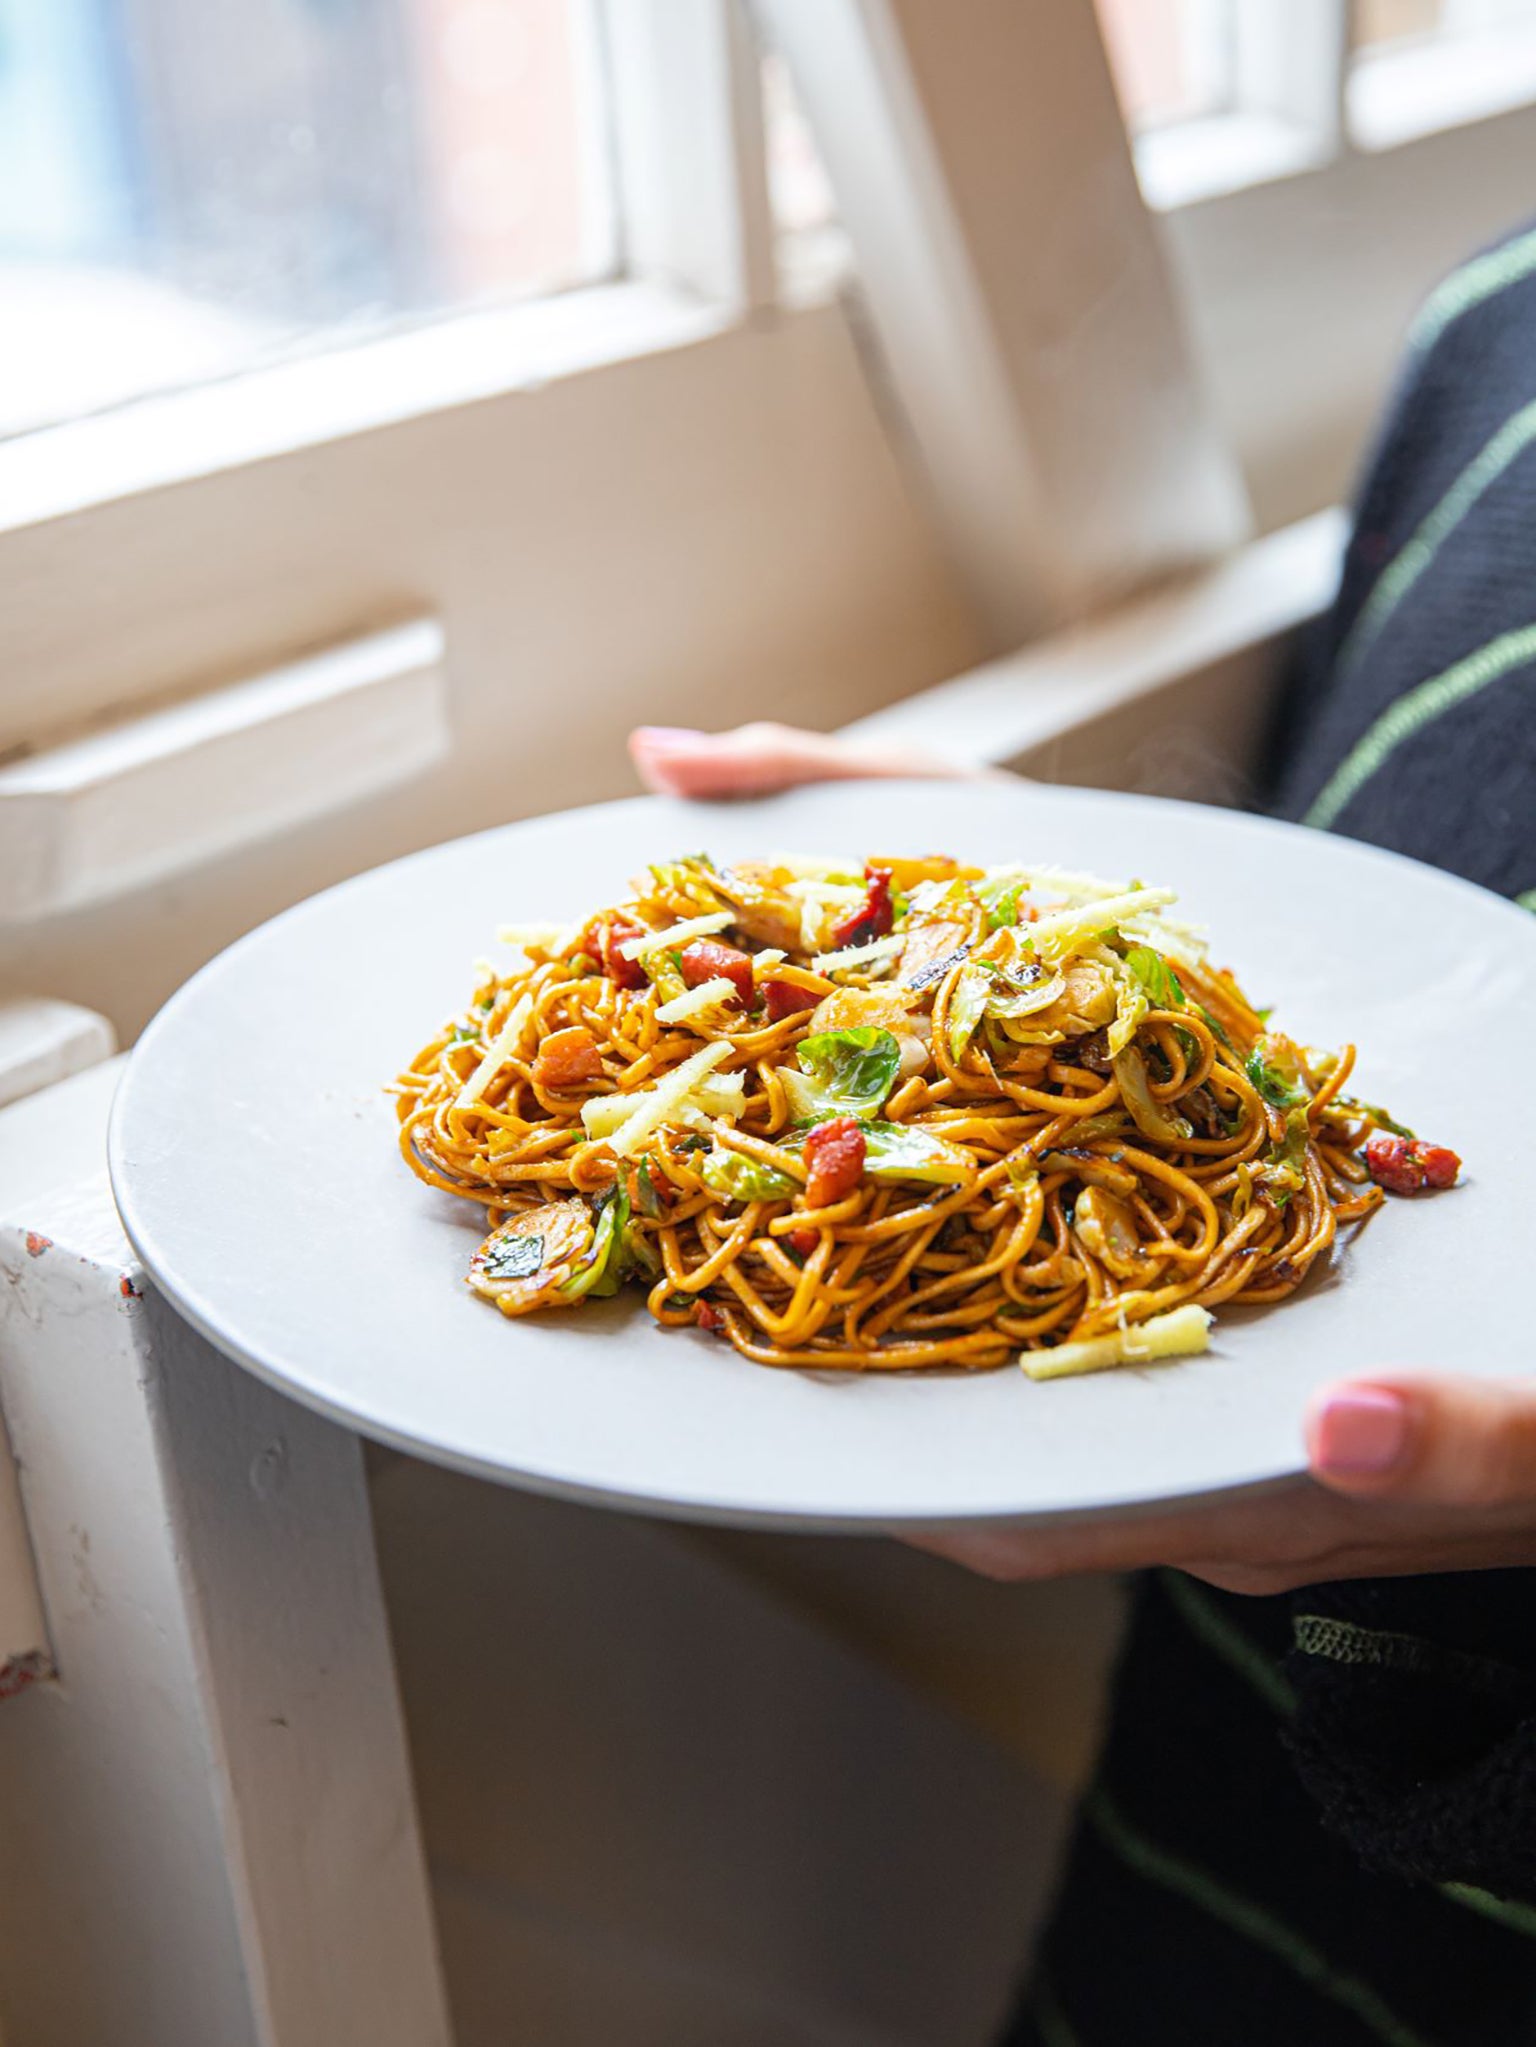 Chow mein is the perfect for vehicle for leftover veg